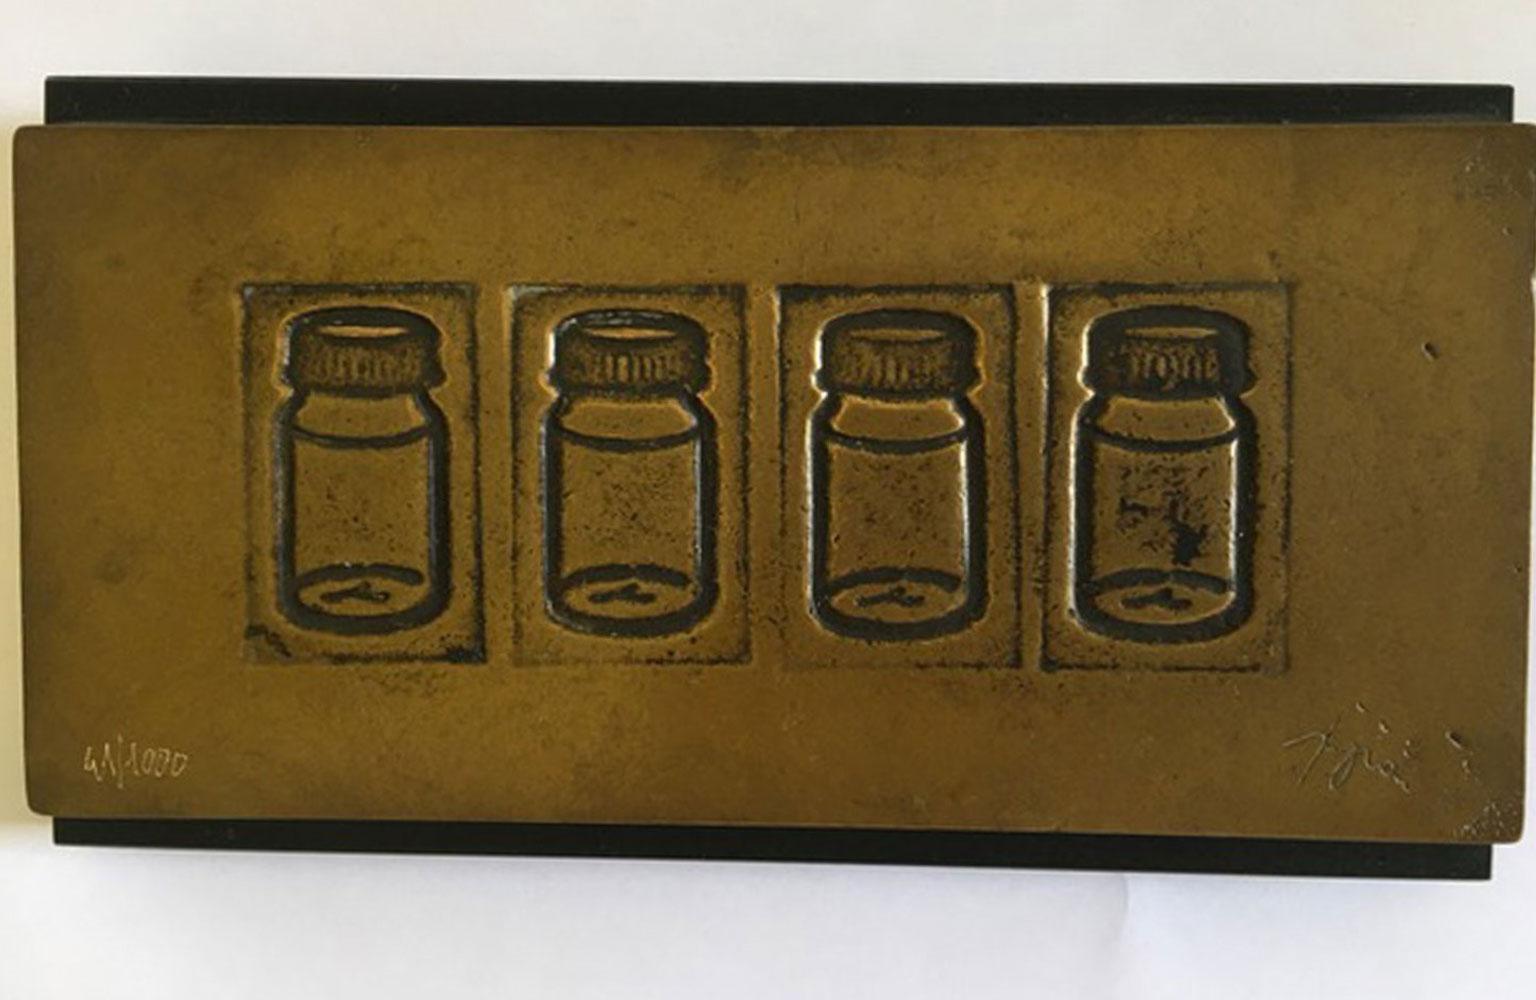 This is a multiple bronze with wood base create by the Italian artist Tino Stefanoni in 1980 circa.
This artwork is following Pop Art and its philosophy that elevates everyday objetcs to art. In this piece the artist doesn't uses the real objects